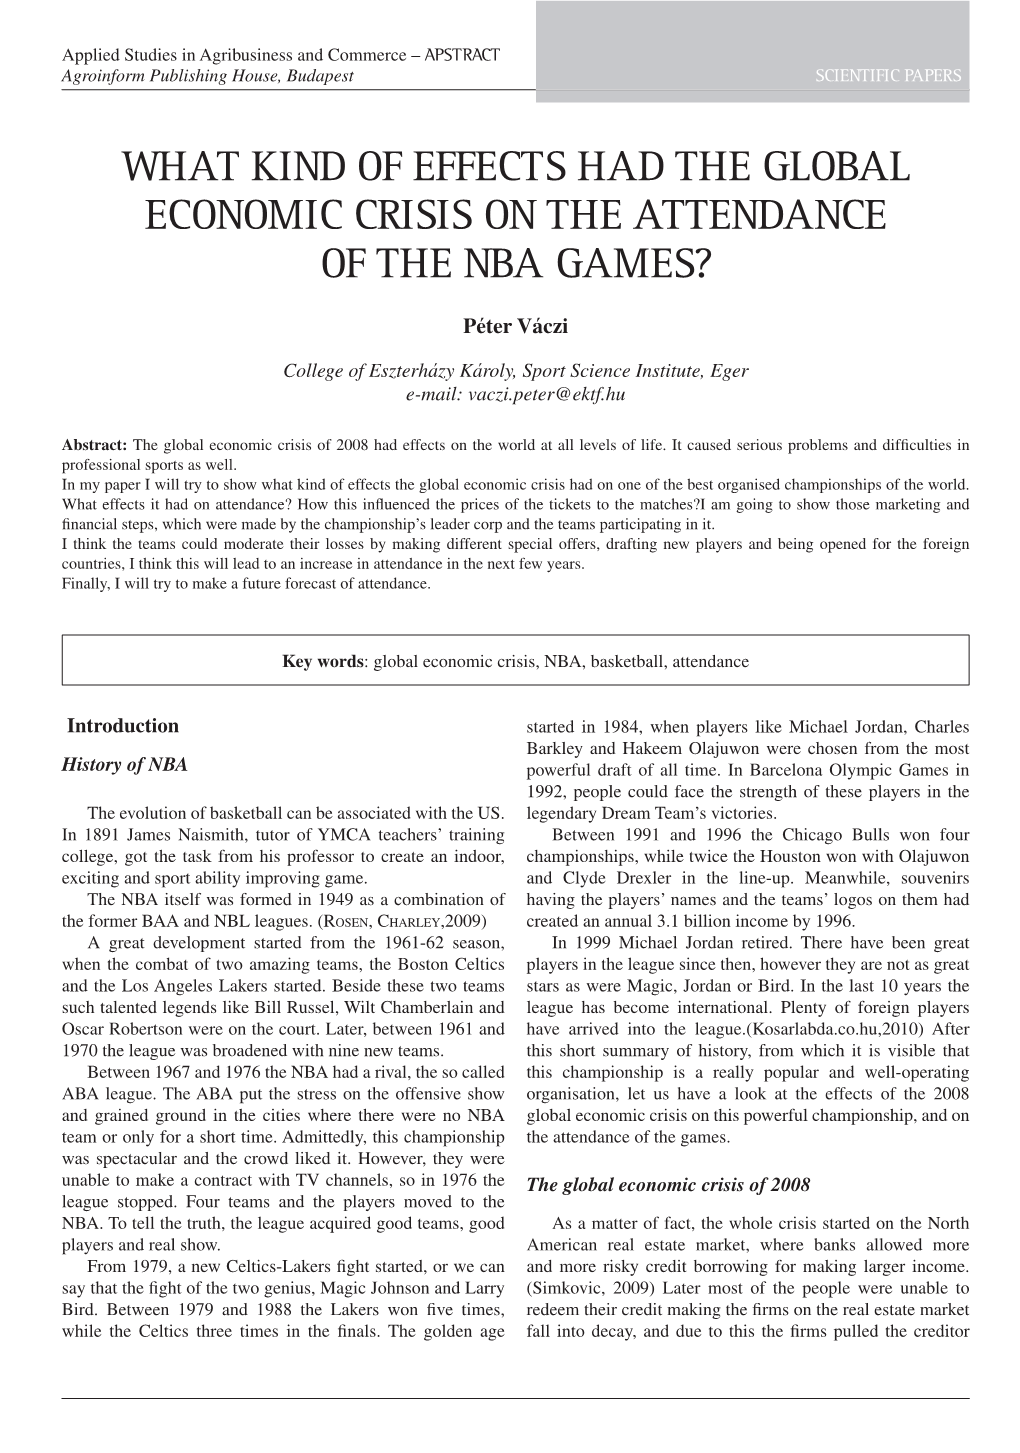 What Kind of Effects Had the Global Economic Crisis on the Attendance of the NBA Games?